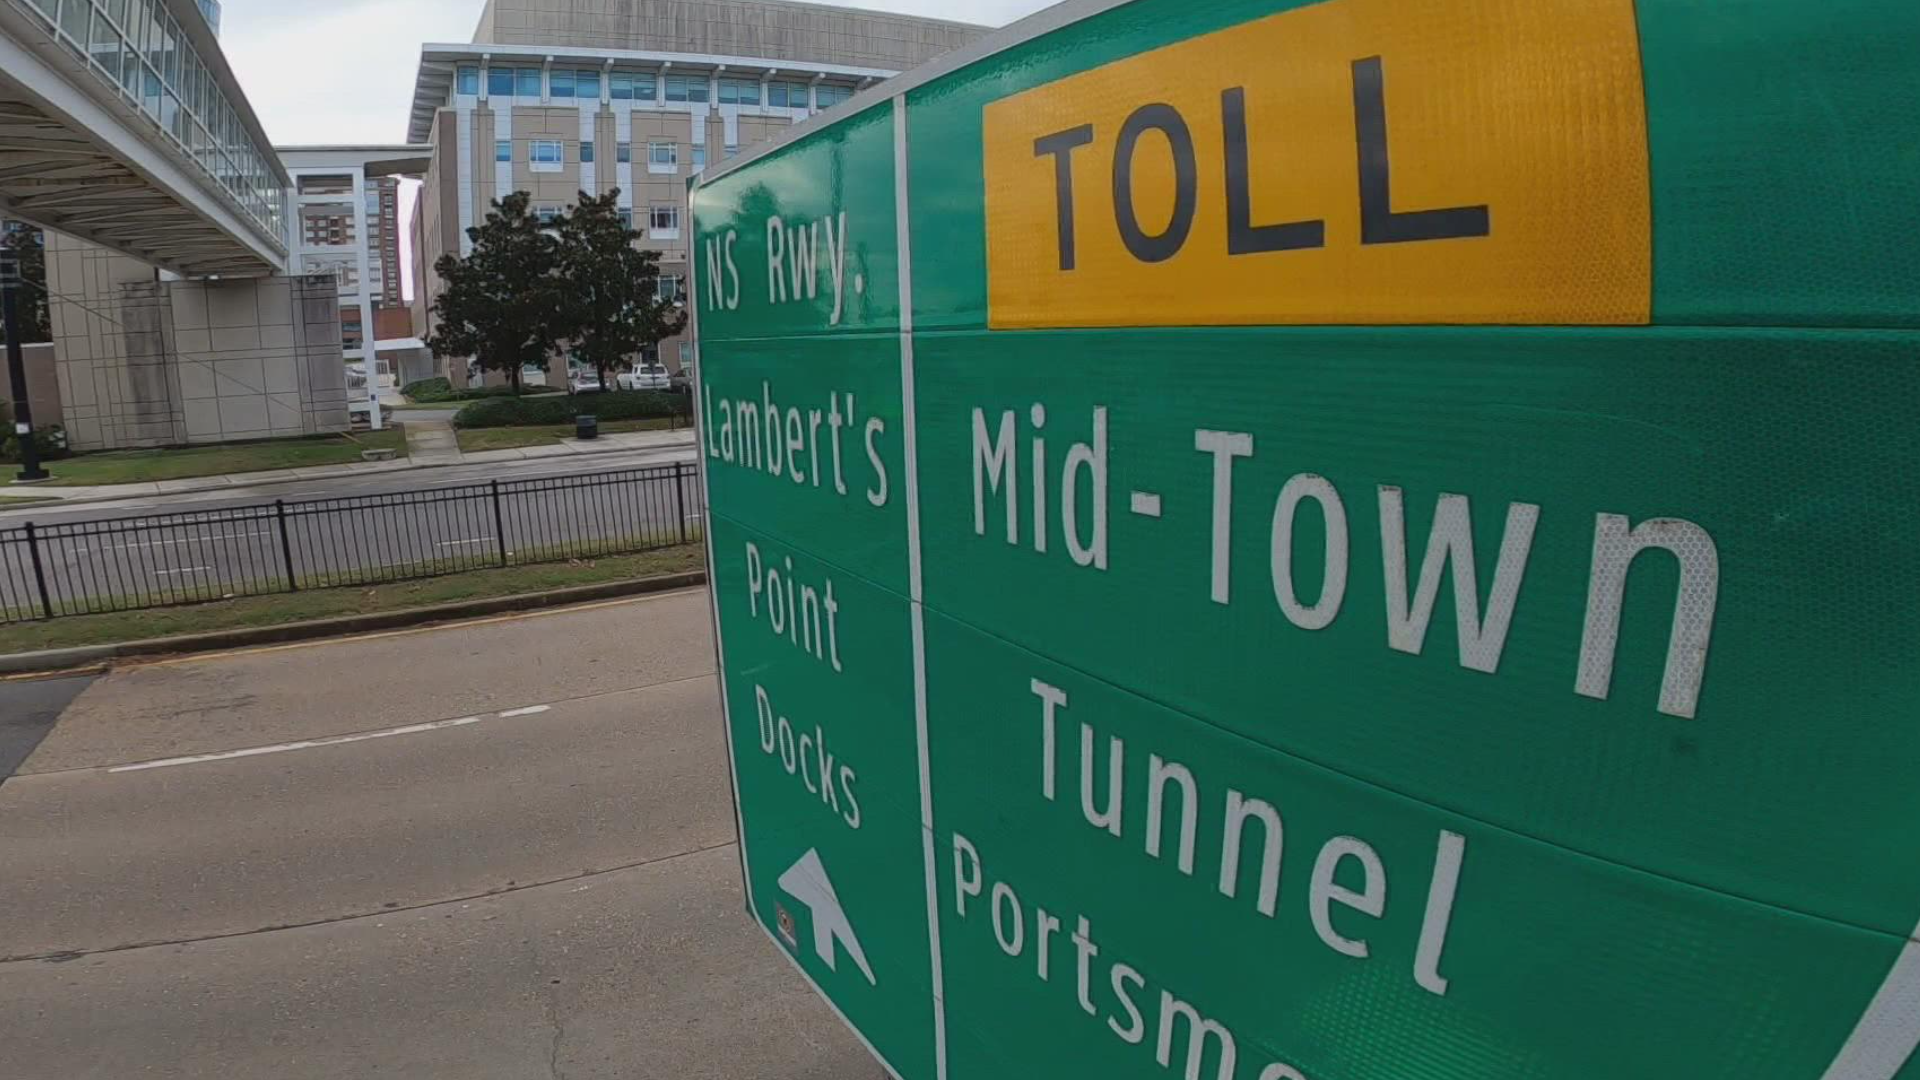 People in Portsmouth and Norfolk who earn less than $30,000 a year could be eligible to get discounts on tolls in the Downtown and Midtown tunnels.